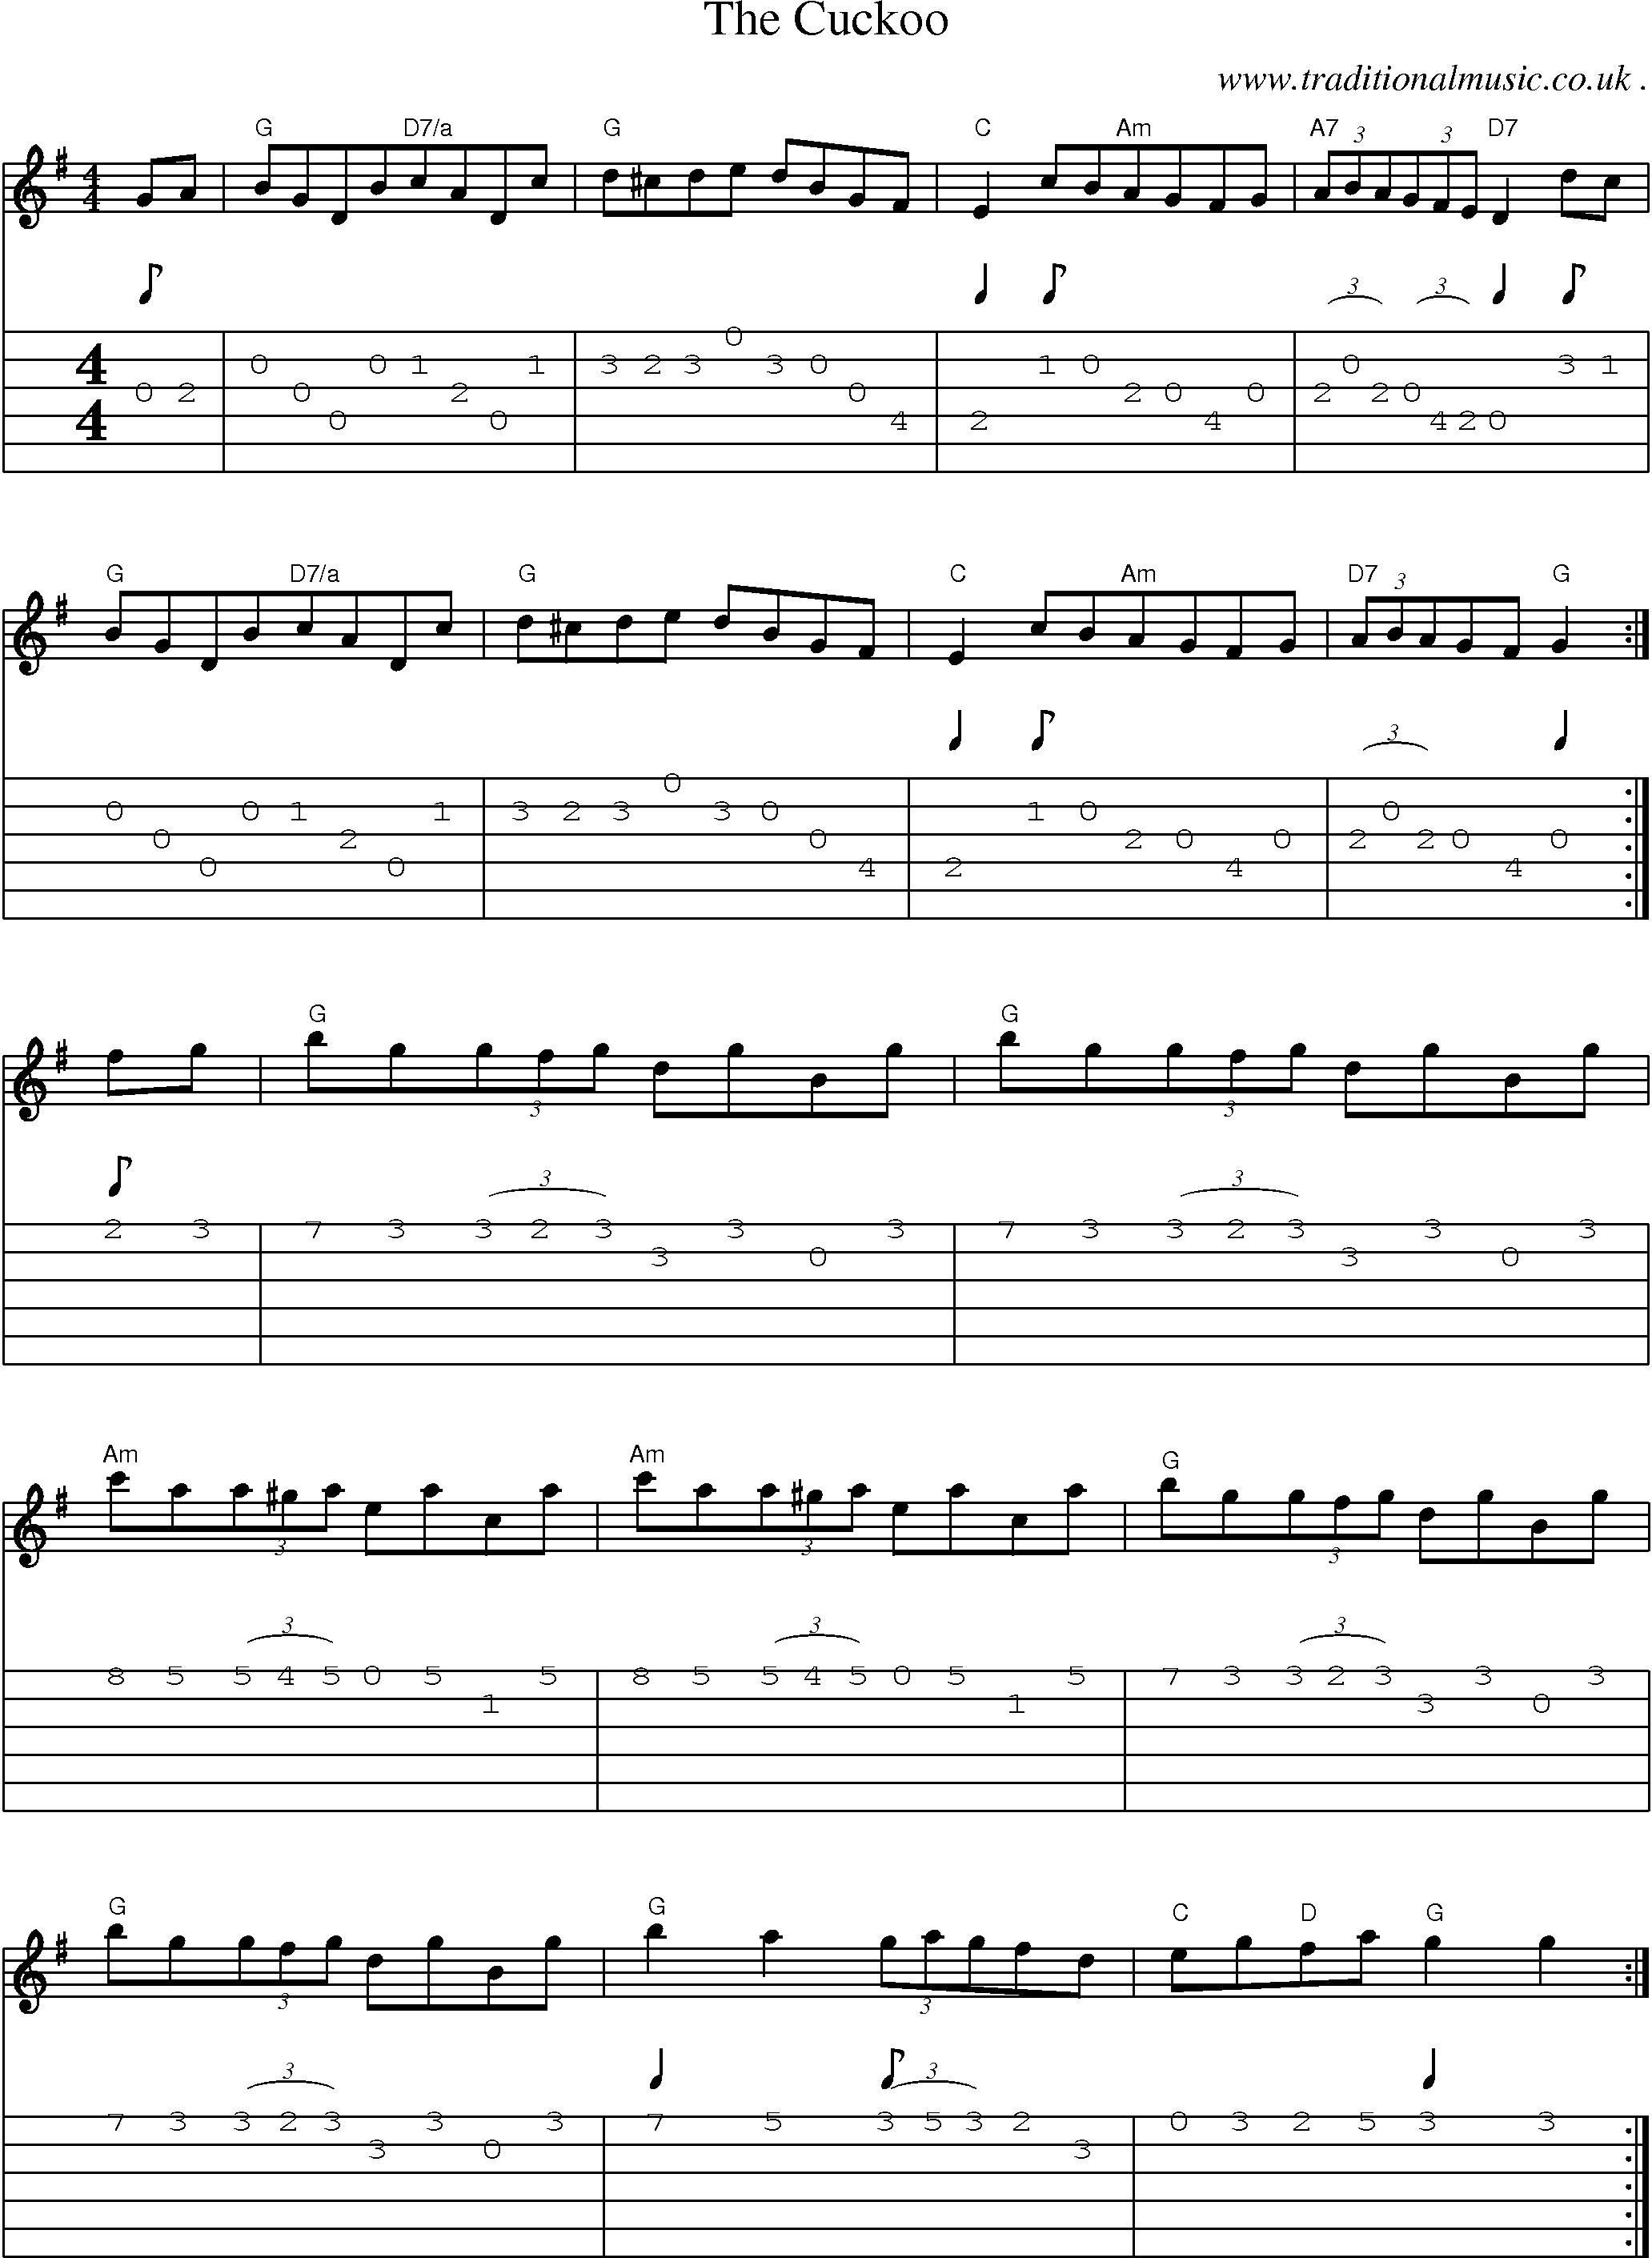 Sheet-Music and Guitar Tabs for The Cuckoo